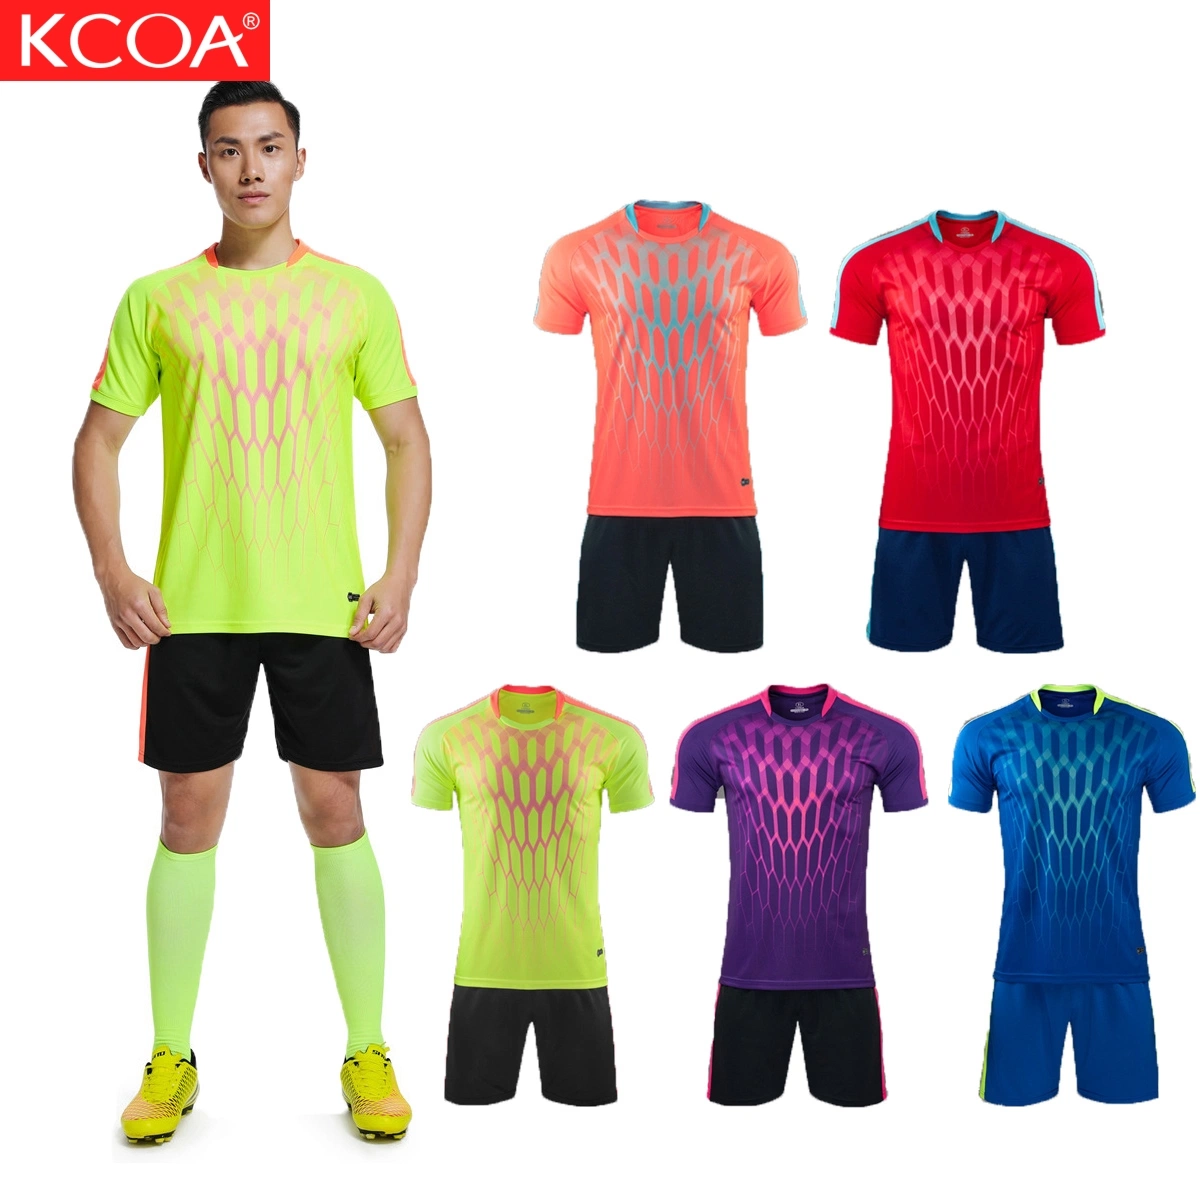 Kcoa Top Quality in Stock Men Training Cheap Football Jersey